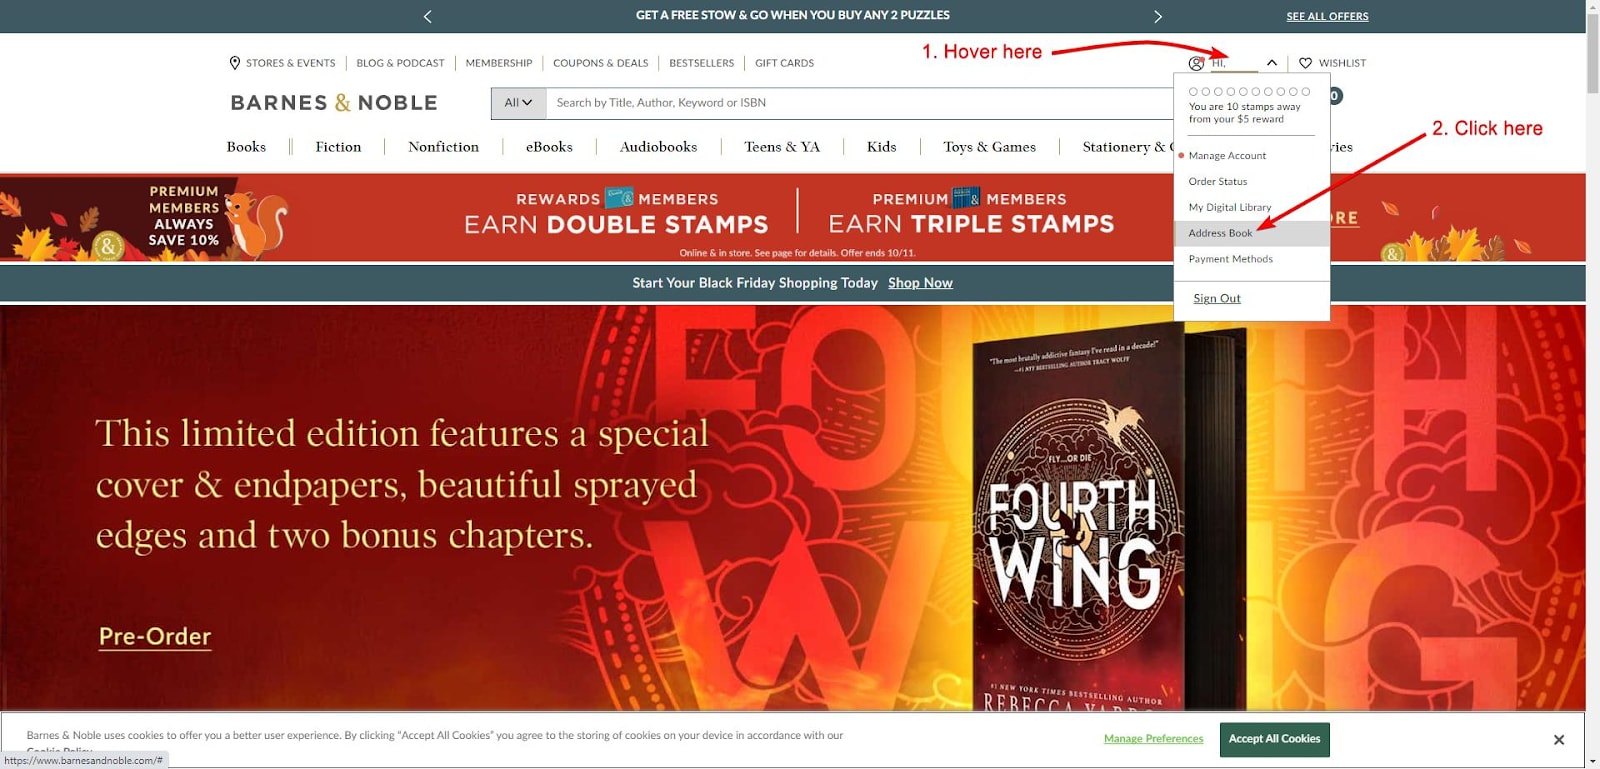 Barnes & Noble Member Home Page